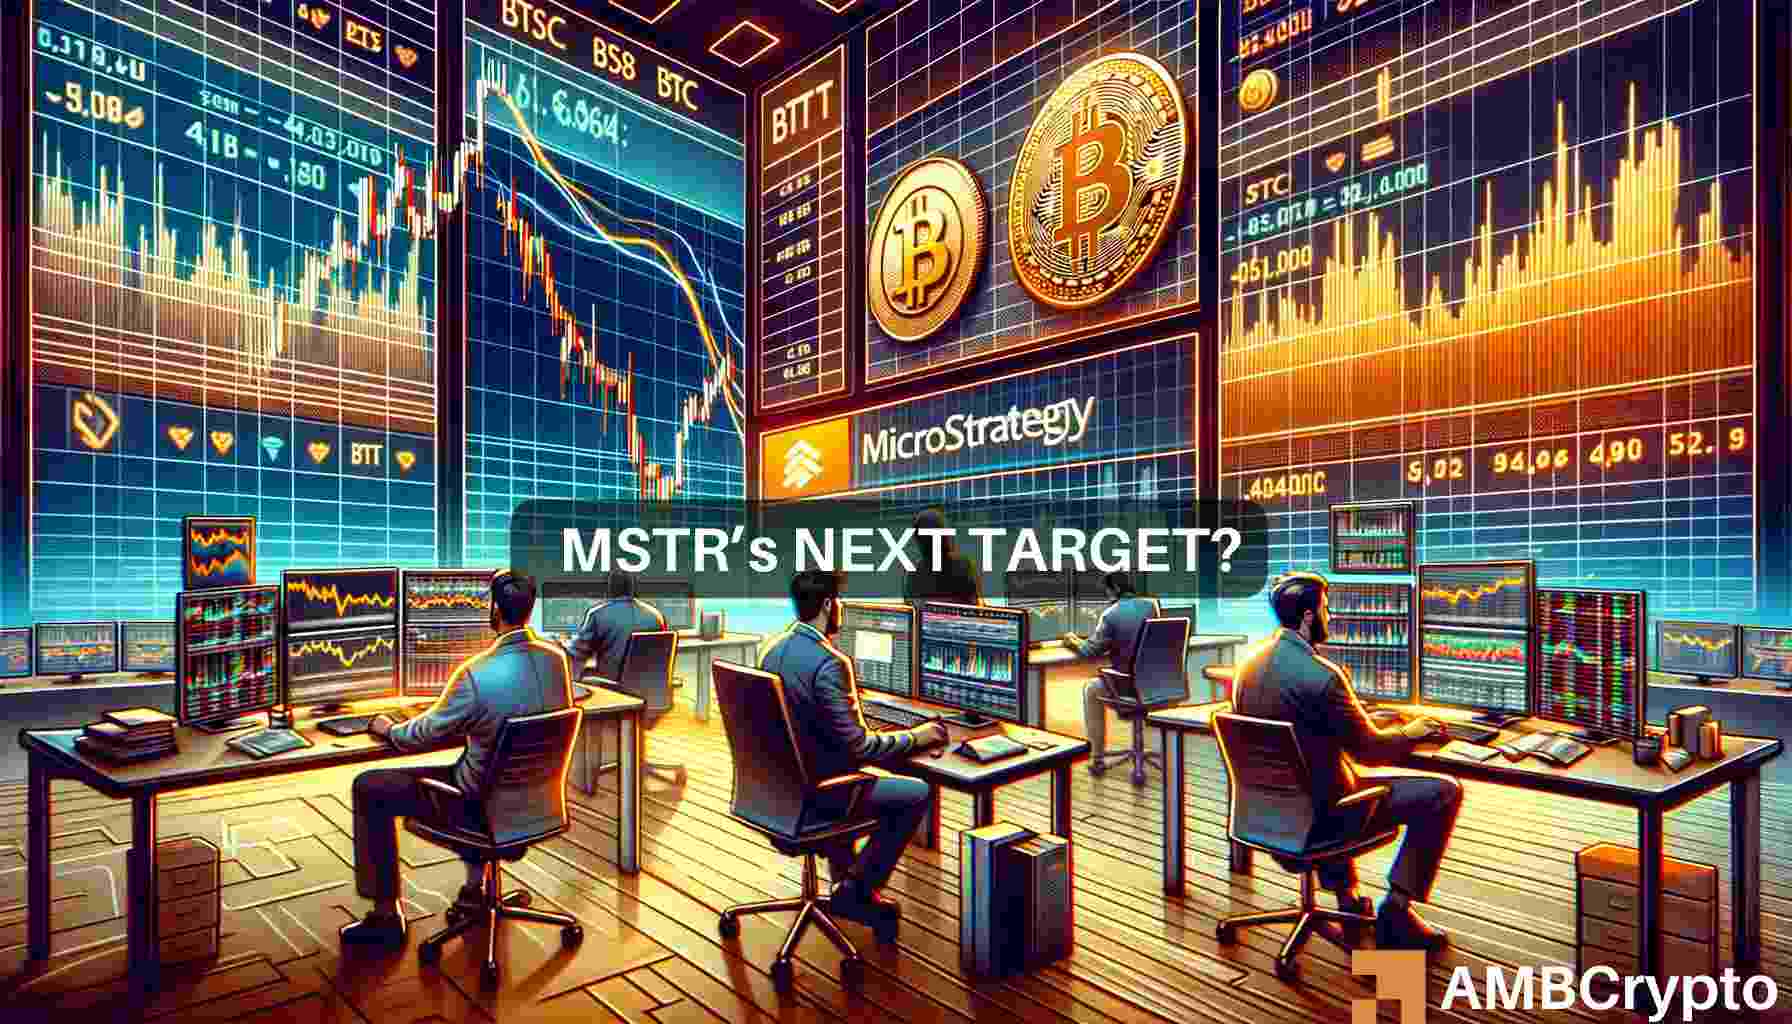 MicroStrategy Stock’s price prediction reveals what’s next after Bitcoin halving